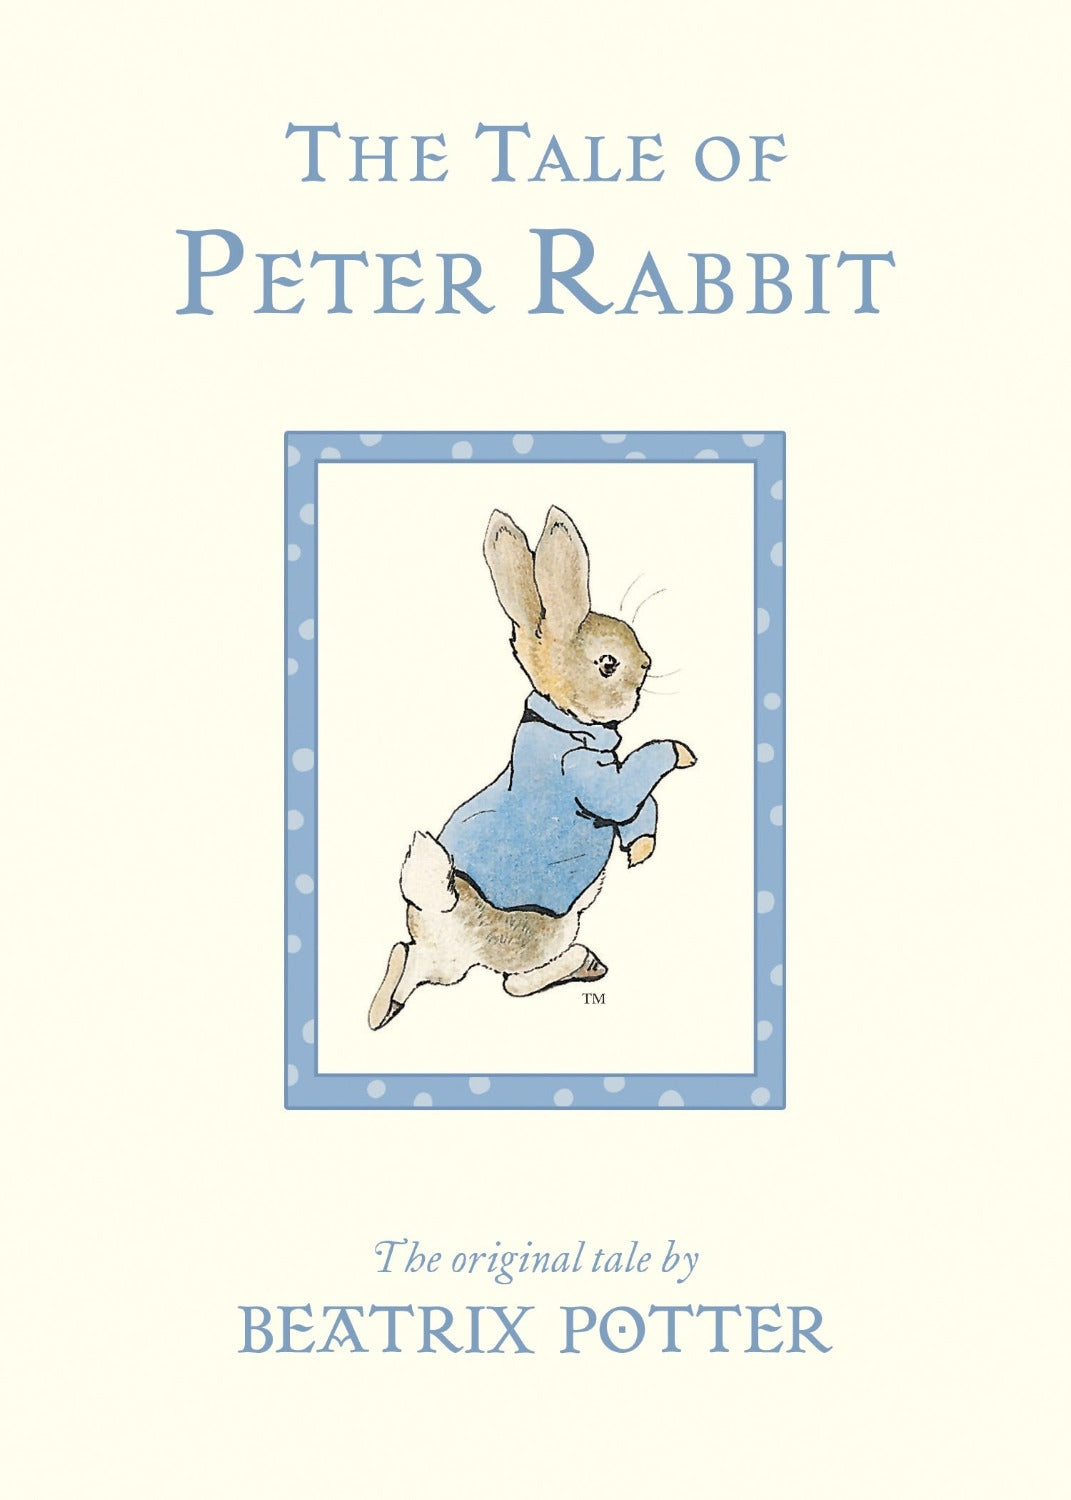 the tale of peter rabbit board book cover